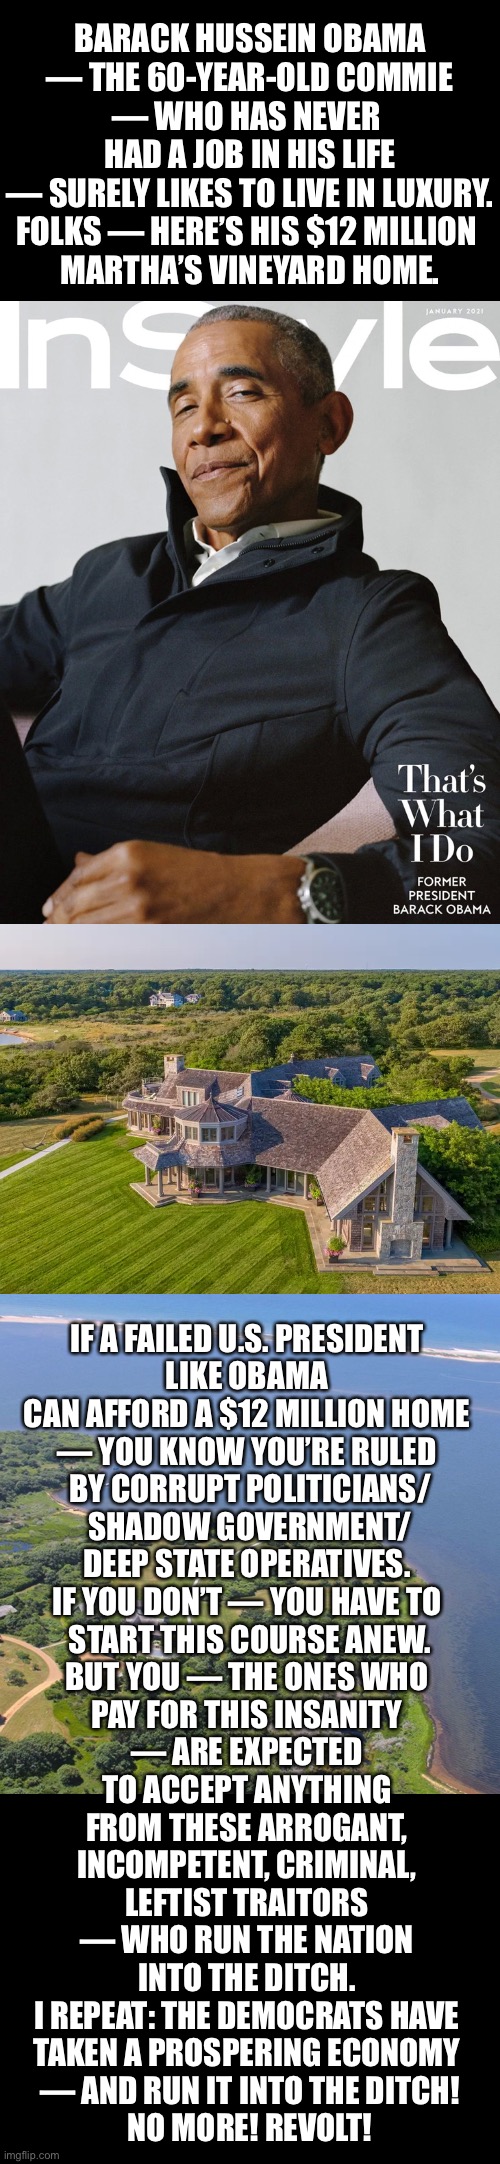 Folks — revolt against these dangerous, corrupt, leftist traitors! | BARACK HUSSEIN OBAMA
— THE 60-YEAR-OLD COMMIE
— WHO HAS NEVER 
HAD A JOB IN HIS LIFE

— SURELY LIKES TO LIVE IN LUXURY.
FOLKS — HERE’S HIS $12 MILLION 
MARTHA’S VINEYARD HOME. IF A FAILED U.S. PRESIDENT 
LIKE OBAMA 
CAN AFFORD A $12 MILLION HOME 
— YOU KNOW YOU’RE RULED 
BY CORRUPT POLITICIANS/
SHADOW GOVERNMENT/
DEEP STATE OPERATIVES. 
IF YOU DON’T — YOU HAVE TO 
START THIS COURSE ANEW.
BUT YOU — THE ONES WHO 
PAY FOR THIS INSANITY 
— ARE EXPECTED 
TO ACCEPT ANYTHING 
FROM THESE ARROGANT, 
INCOMPETENT, CRIMINAL, 
LEFTIST TRAITORS 
— WHO RUN THE NATION 
INTO THE DITCH. 
I REPEAT: THE DEMOCRATS HAVE 
TAKEN A PROSPERING ECONOMY 
— AND RUN IT INTO THE DITCH!
NO MORE! REVOLT! | image tagged in barack obama,obama,biden obama,obama owned,democrat party,communist | made w/ Imgflip meme maker